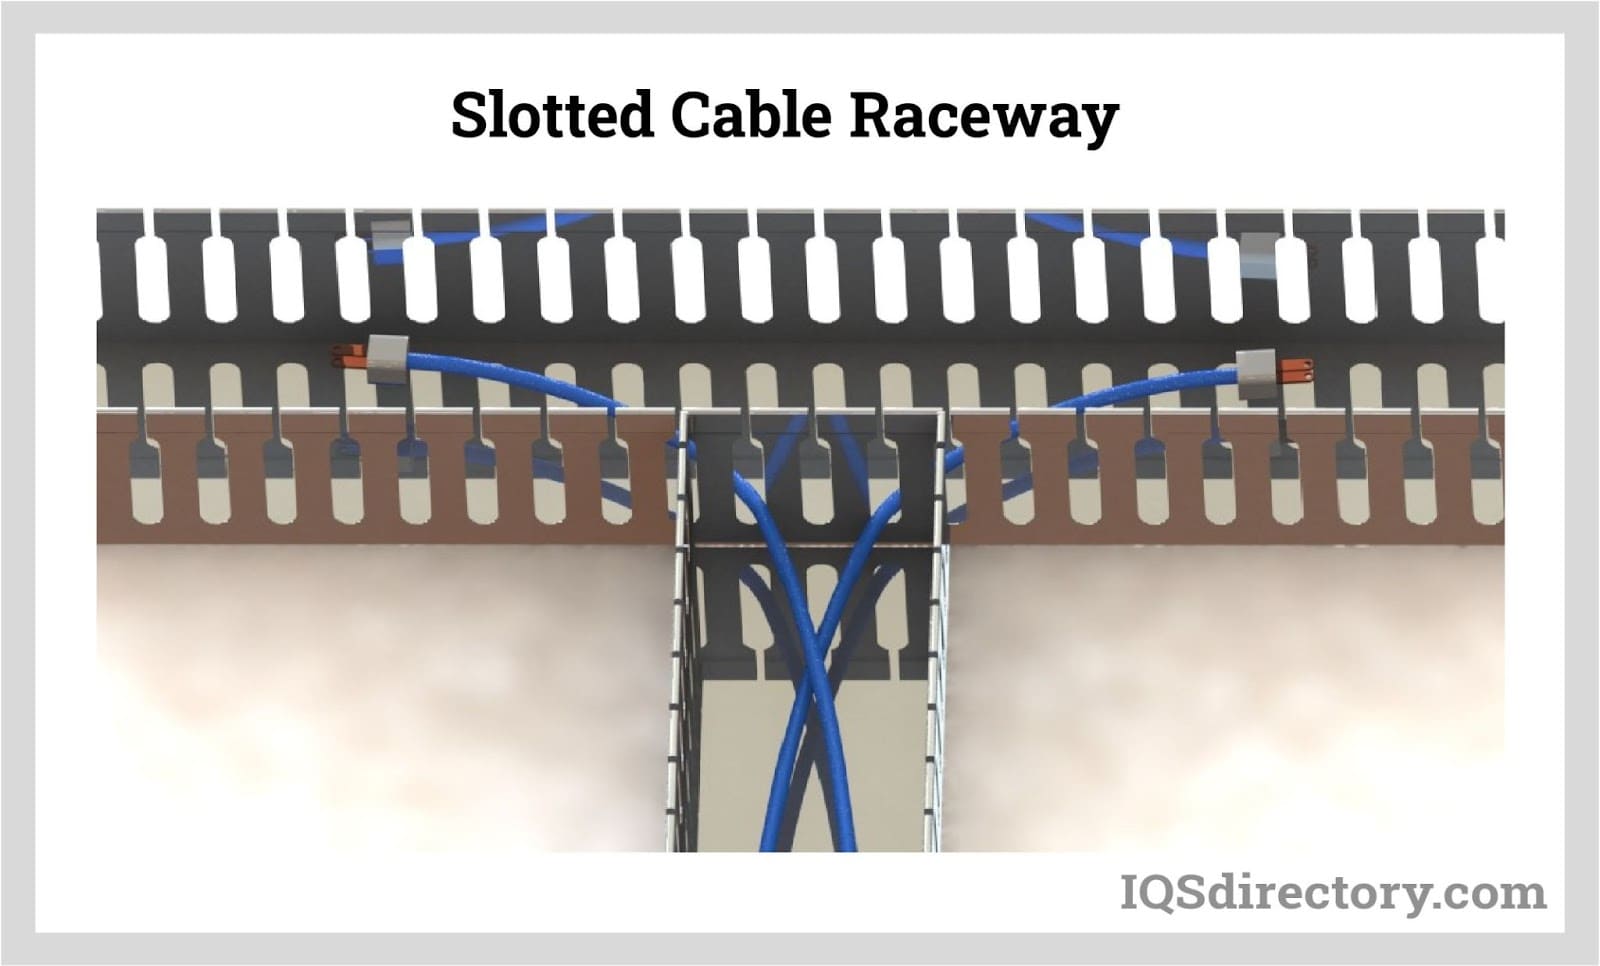 Slotted Cable Raceway